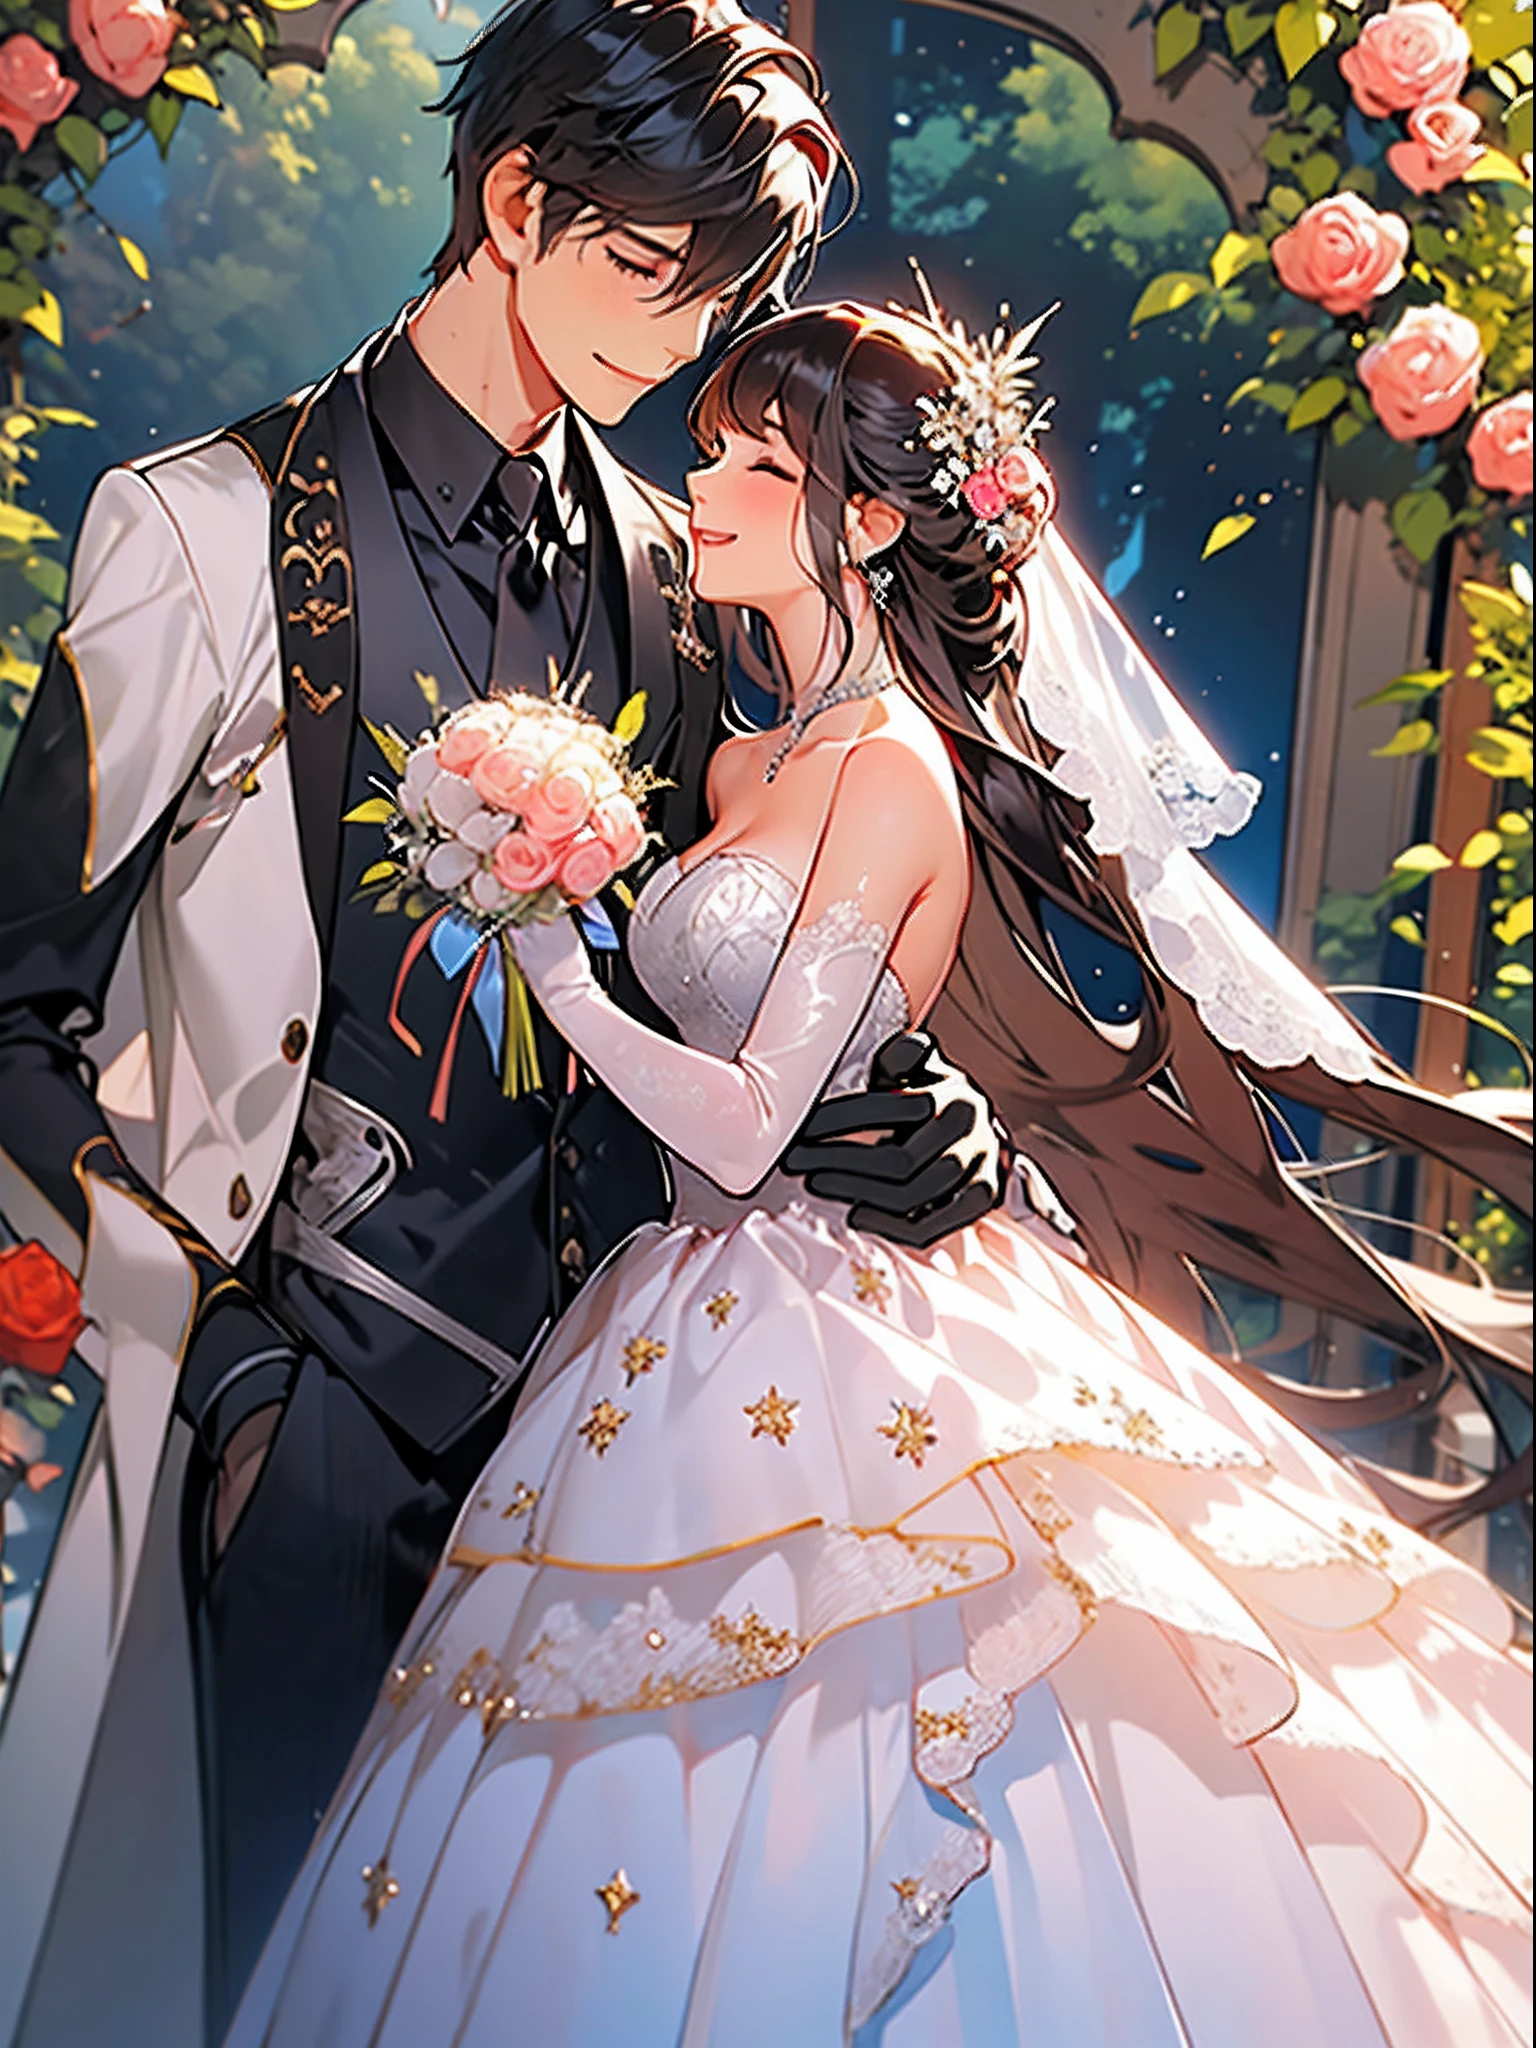 masterpiece, 1girl, 1boy, dress, two people, wedding dress, necktie, couple, smile, strapless dress, closed eyes, pants, strapless, veil, flower, long hair, holding, jewelry, gloves, shirt, necklace, bouquet, white pants, holding bouquet, white dress, blue eyes, white shirt, open jacket, holding hands, elbow gloves, white gloves, white jacket, pink necktie, bridal veil, white background, wedding, husband and wife, long sleeves, long dress, pink flower, short hair, standing, novel cover